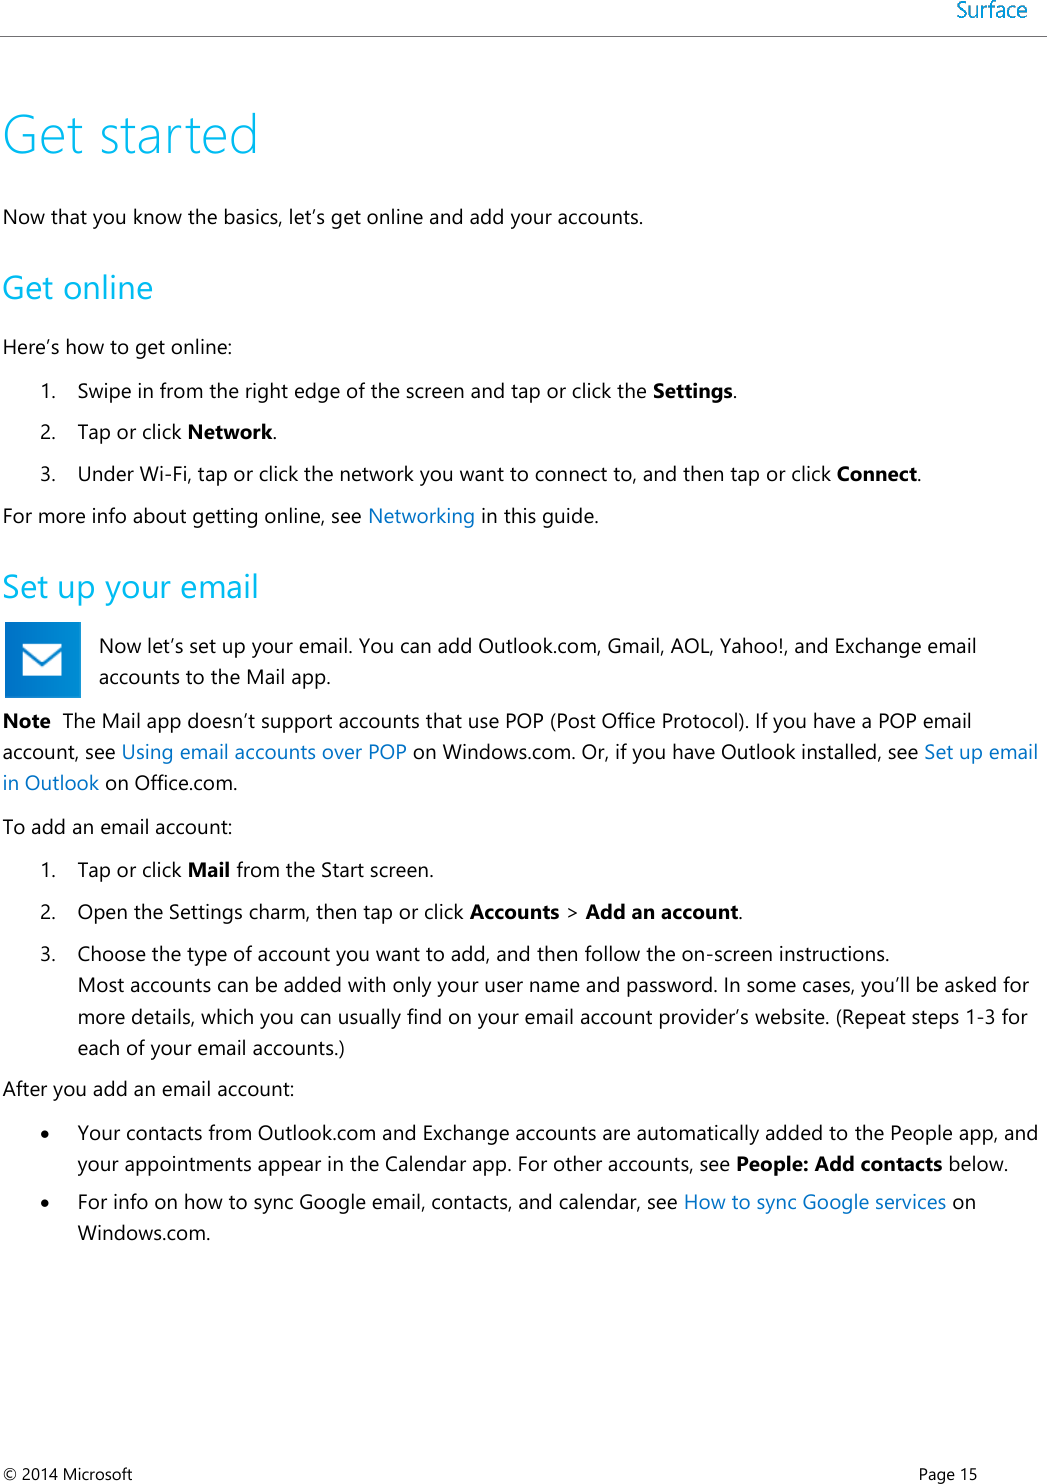  © 2014 Microsoft      Page 15  Get started Now that you know the basics, let’s get online and add your accounts. Get online Here’s how to get online: 1. Swipe in from the right edge of the screen and tap or click the Settings. 2. Tap or click Network. 3. Under Wi-Fi, tap or click the network you want to connect to, and then tap or click Connect. For more info about getting online, see Networking in this guide.  Set up your email Now let’s set up your email. You can add Outlook.com, Gmail, AOL, Yahoo!, and Exchange email accounts to the Mail app.  Note  The Mail app doesn’t support accounts that use POP (Post Office Protocol). If you have a POP email account, see Using email accounts over POP on Windows.com. Or, if you have Outlook installed, see Set up email in Outlook on Office.com.   To add an email account: 1. Tap or click Mail from the Start screen. 2. Open the Settings charm, then tap or click Accounts &gt; Add an account.  3. Choose the type of account you want to add, and then follow the on-screen instructions. Most accounts can be added with only your user name and password. In some cases, you’ll be asked for more details, which you can usually find on your email account provider’s website. (Repeat steps 1-3 for each of your email accounts.) After you add an email account:  Your contacts from Outlook.com and Exchange accounts are automatically added to the People app, and your appointments appear in the Calendar app. For other accounts, see People: Add contacts below.  For info on how to sync Google email, contacts, and calendar, see How to sync Google services on Windows.com.  